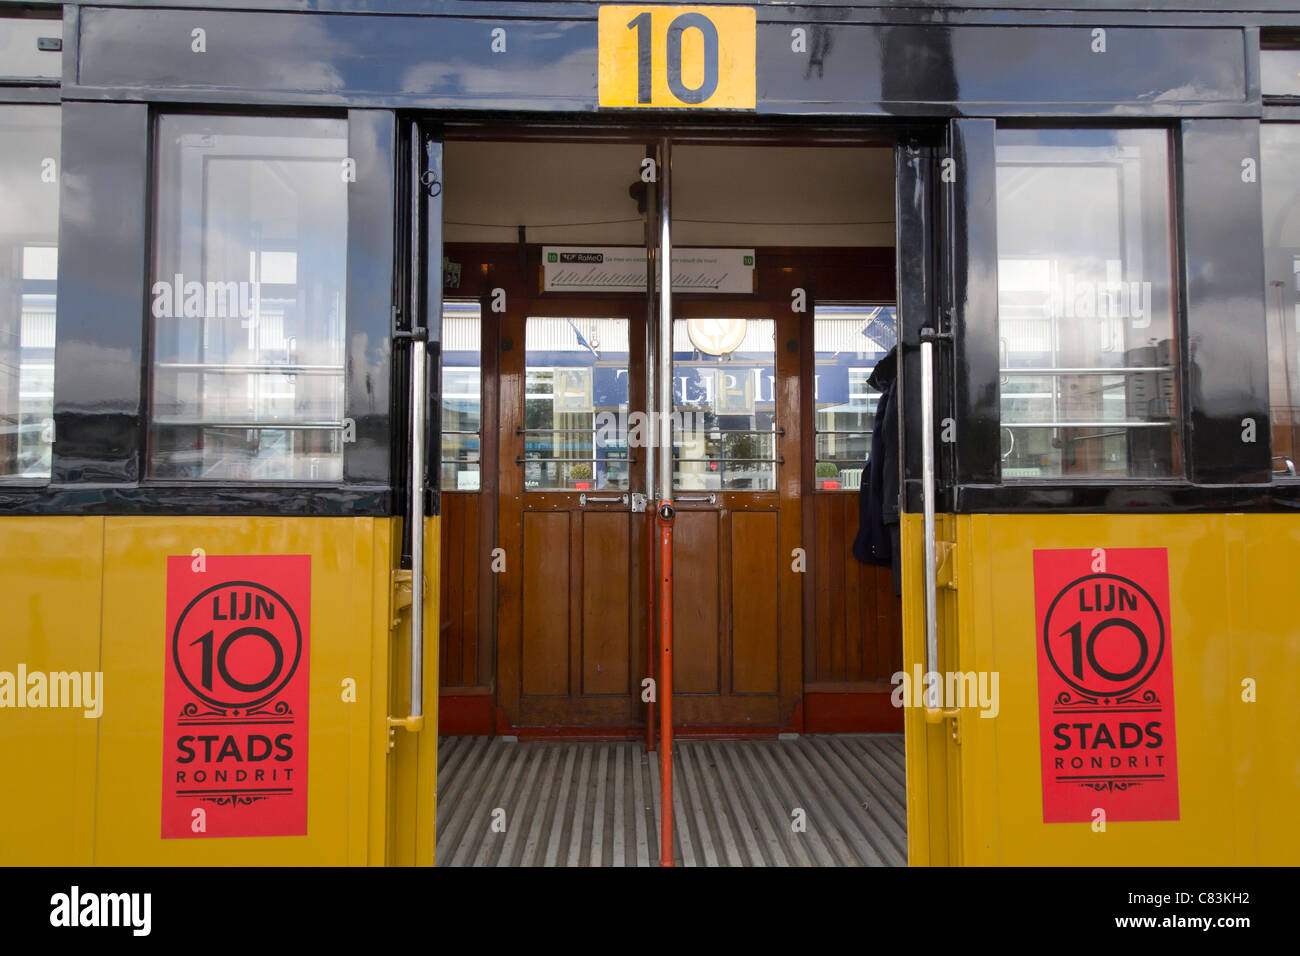 The historical tram in Rotterdam is a vintage streetcar thatoperates on line 10. Rotterdam, The Netherlands Stock Photo